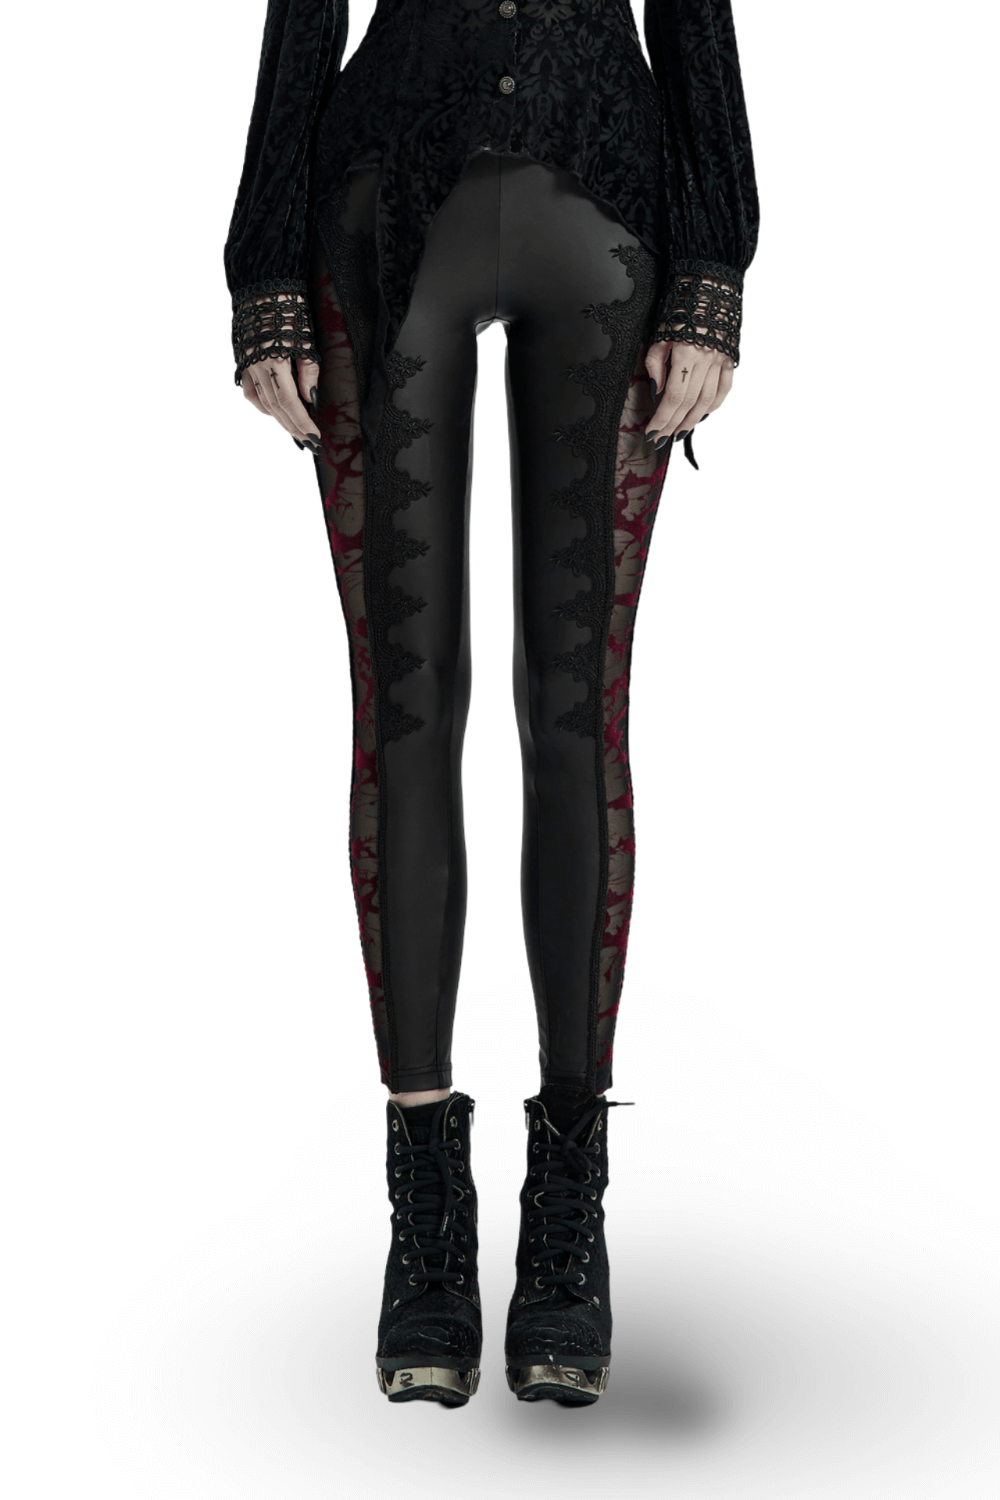 Black Gothic Leggings with Lace Detail and Side Mesh Panels